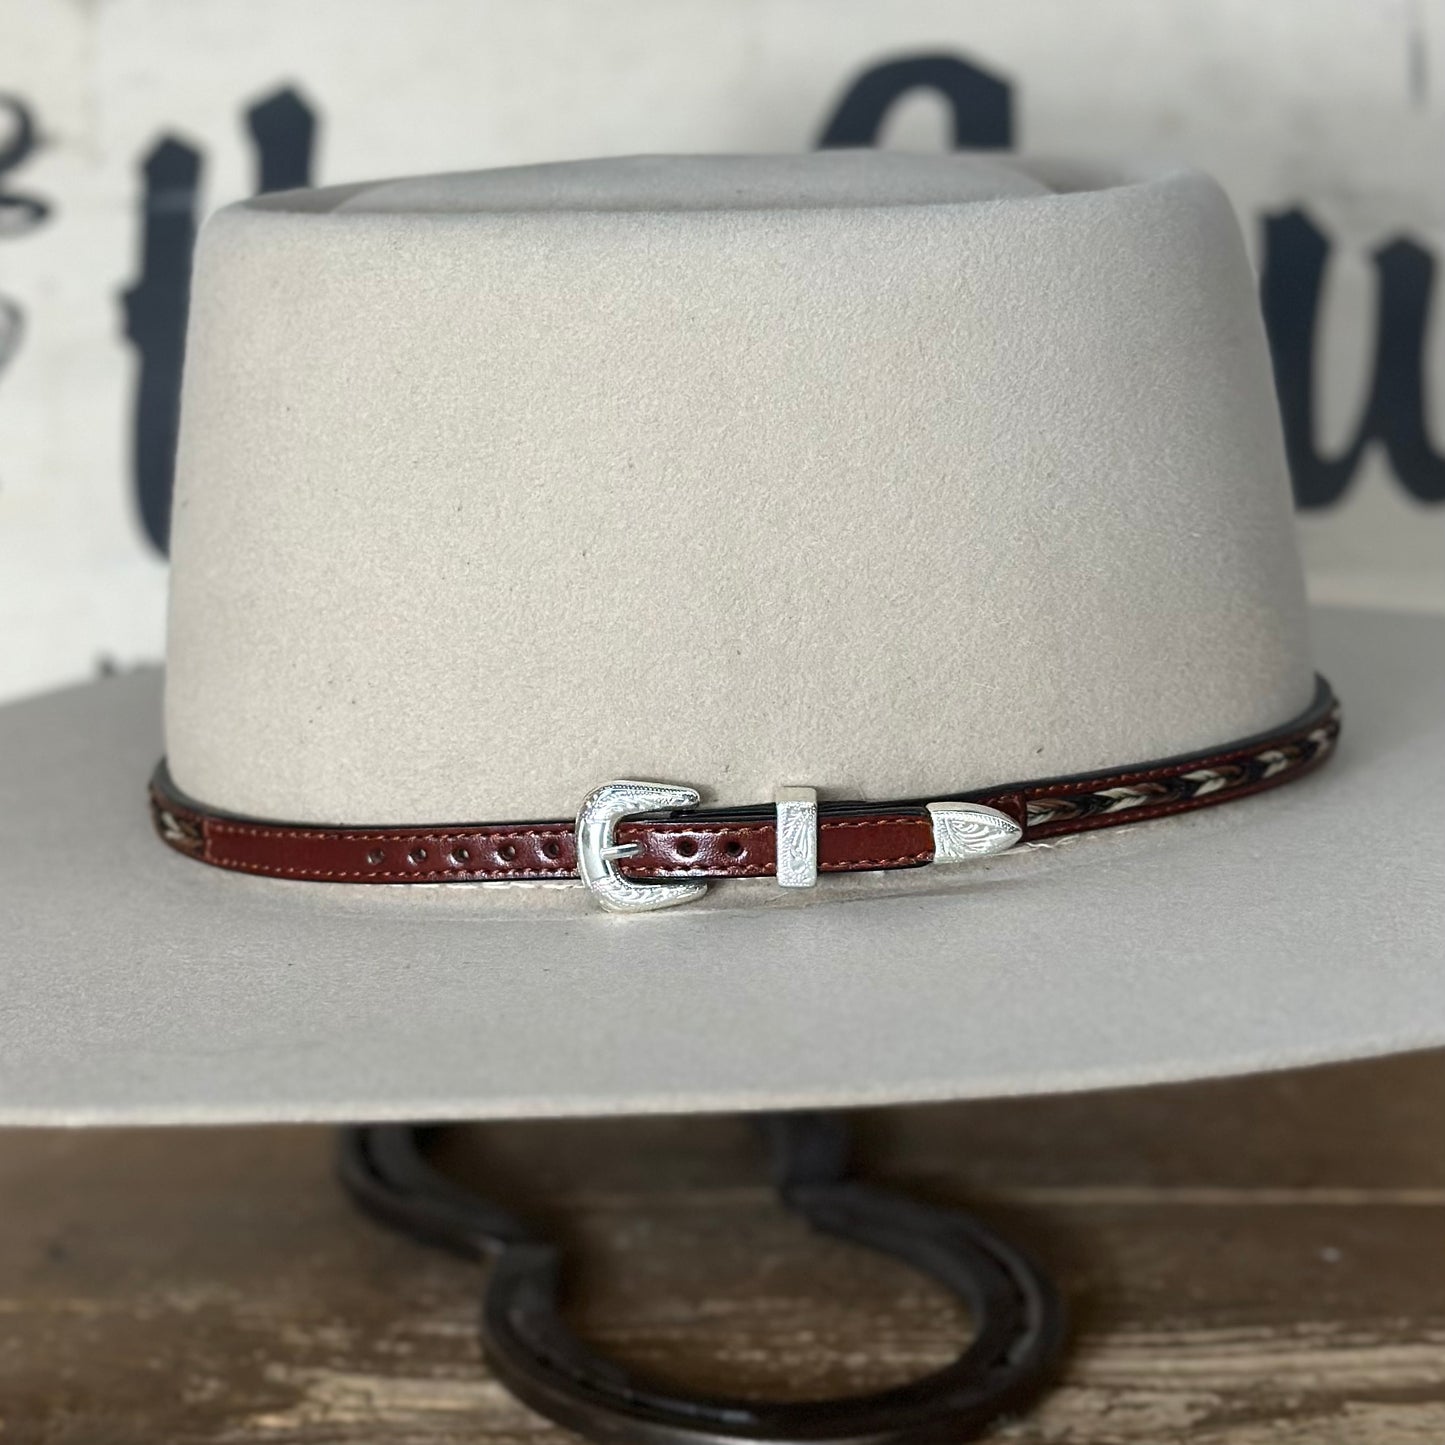 Hatband | Brown Leather w/Brown, Black and Ivory Horsehair Overlay Braid